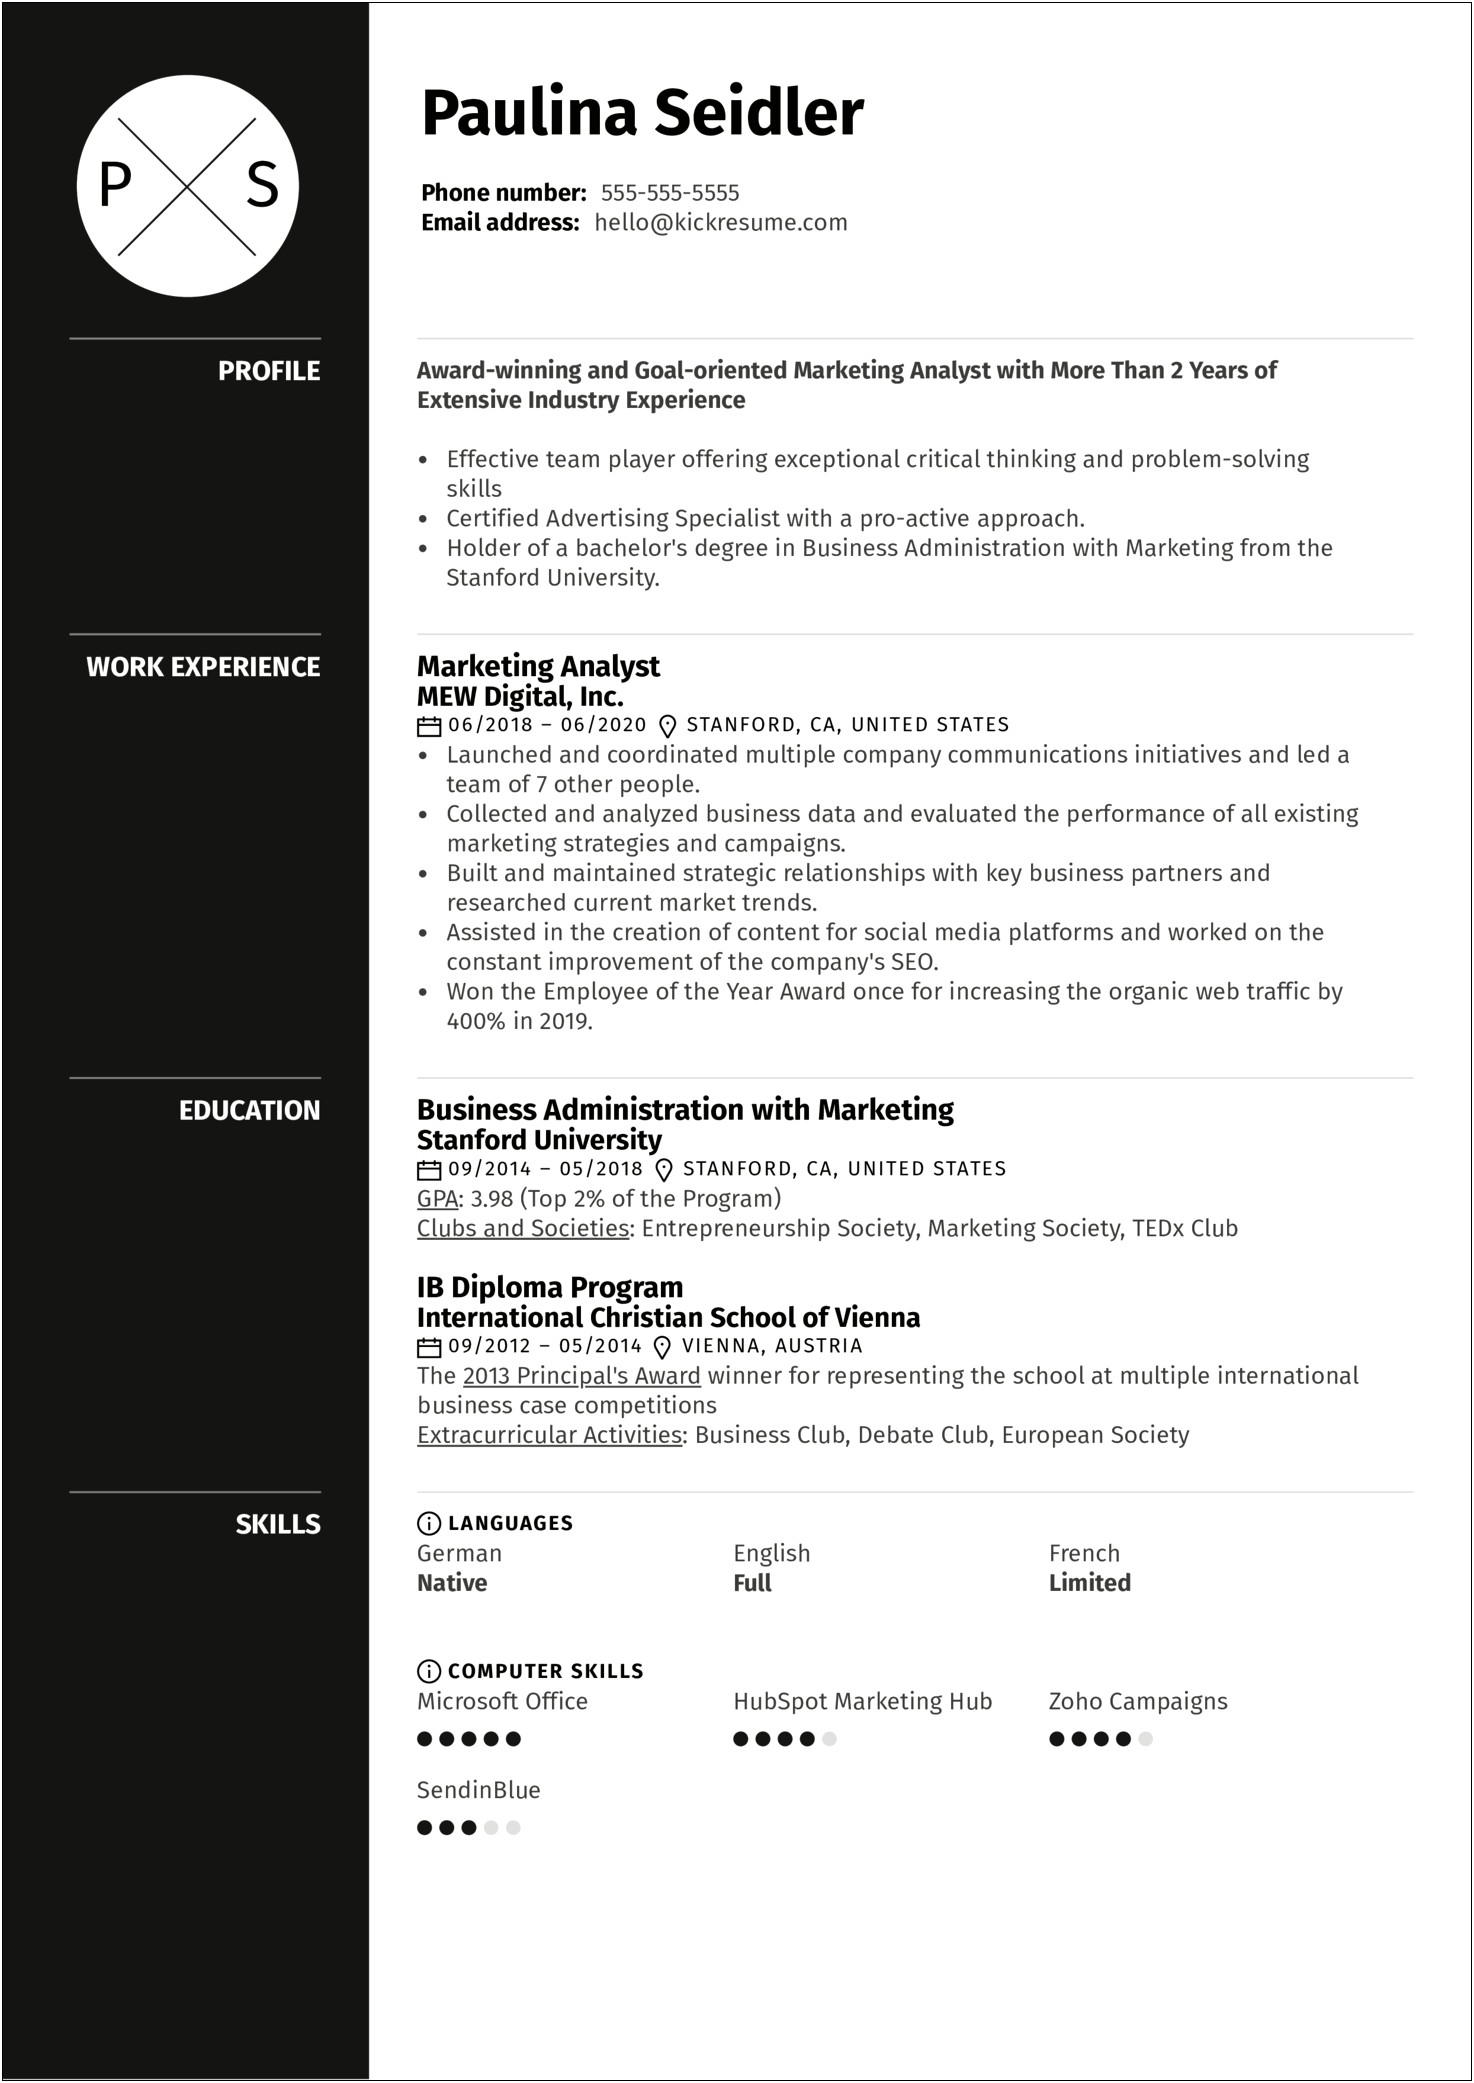 Writing A Head Line Or Summary For Resume